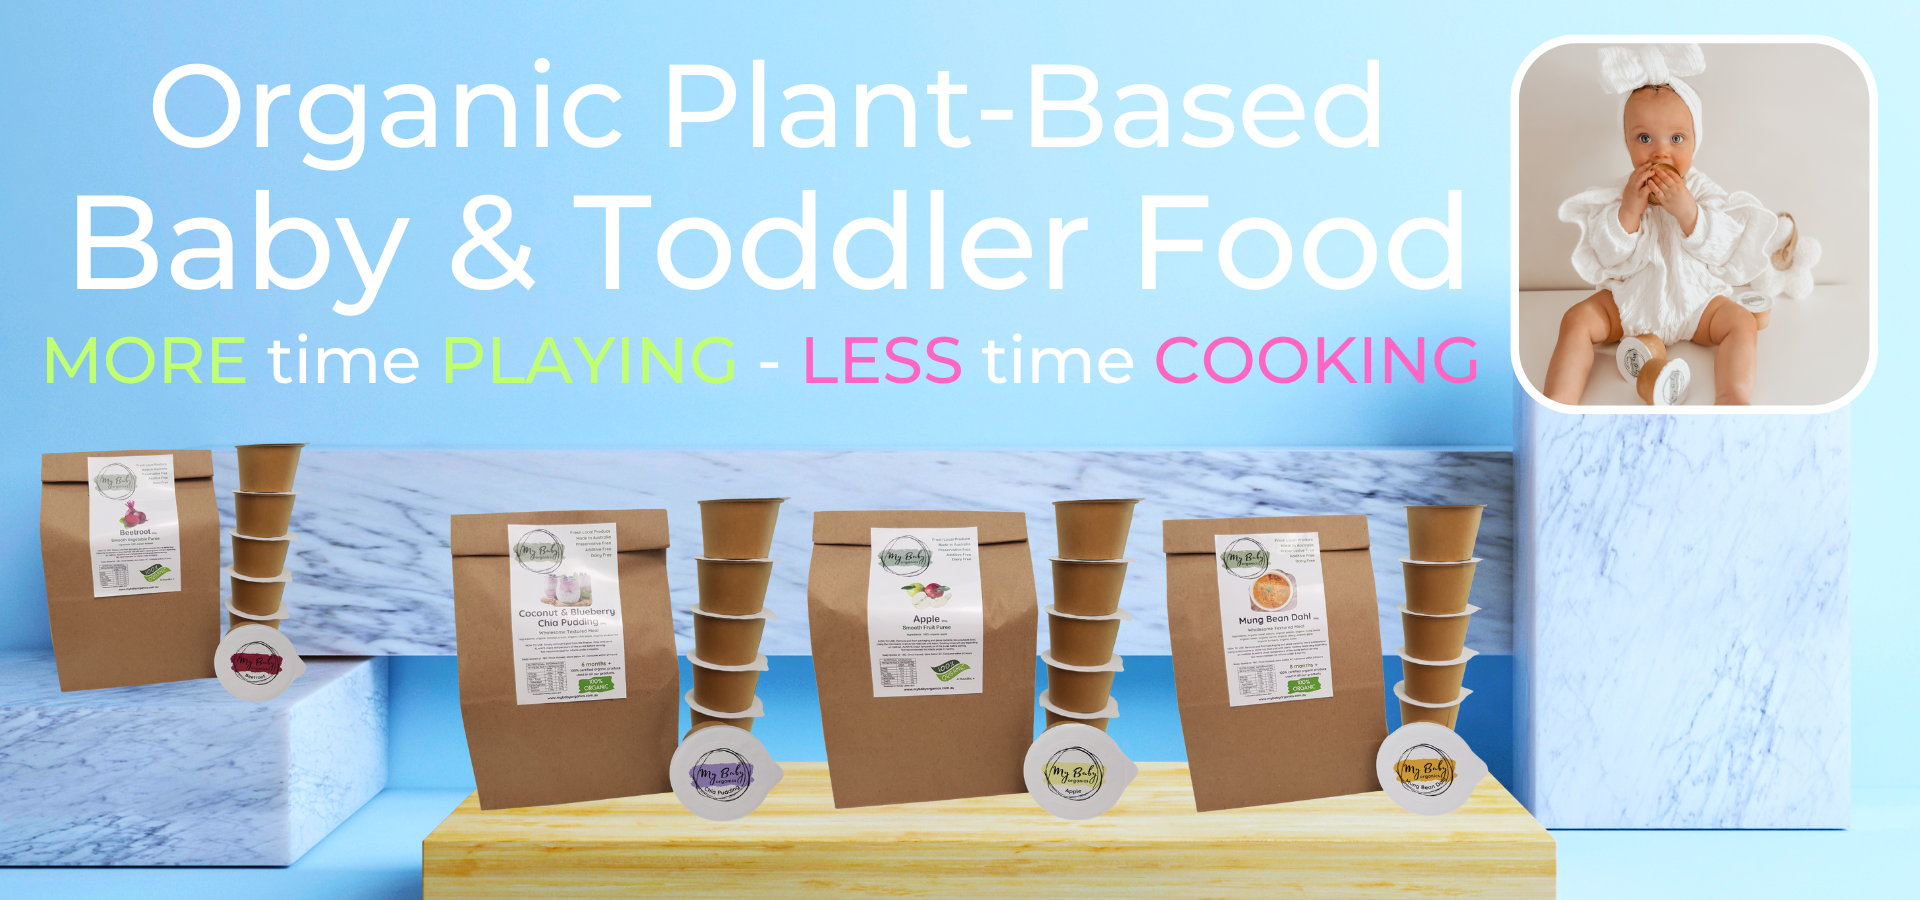 My Baby Organics Australia - Healthy organic baby and toddler food store. Shop for ready-made meals, Australian made